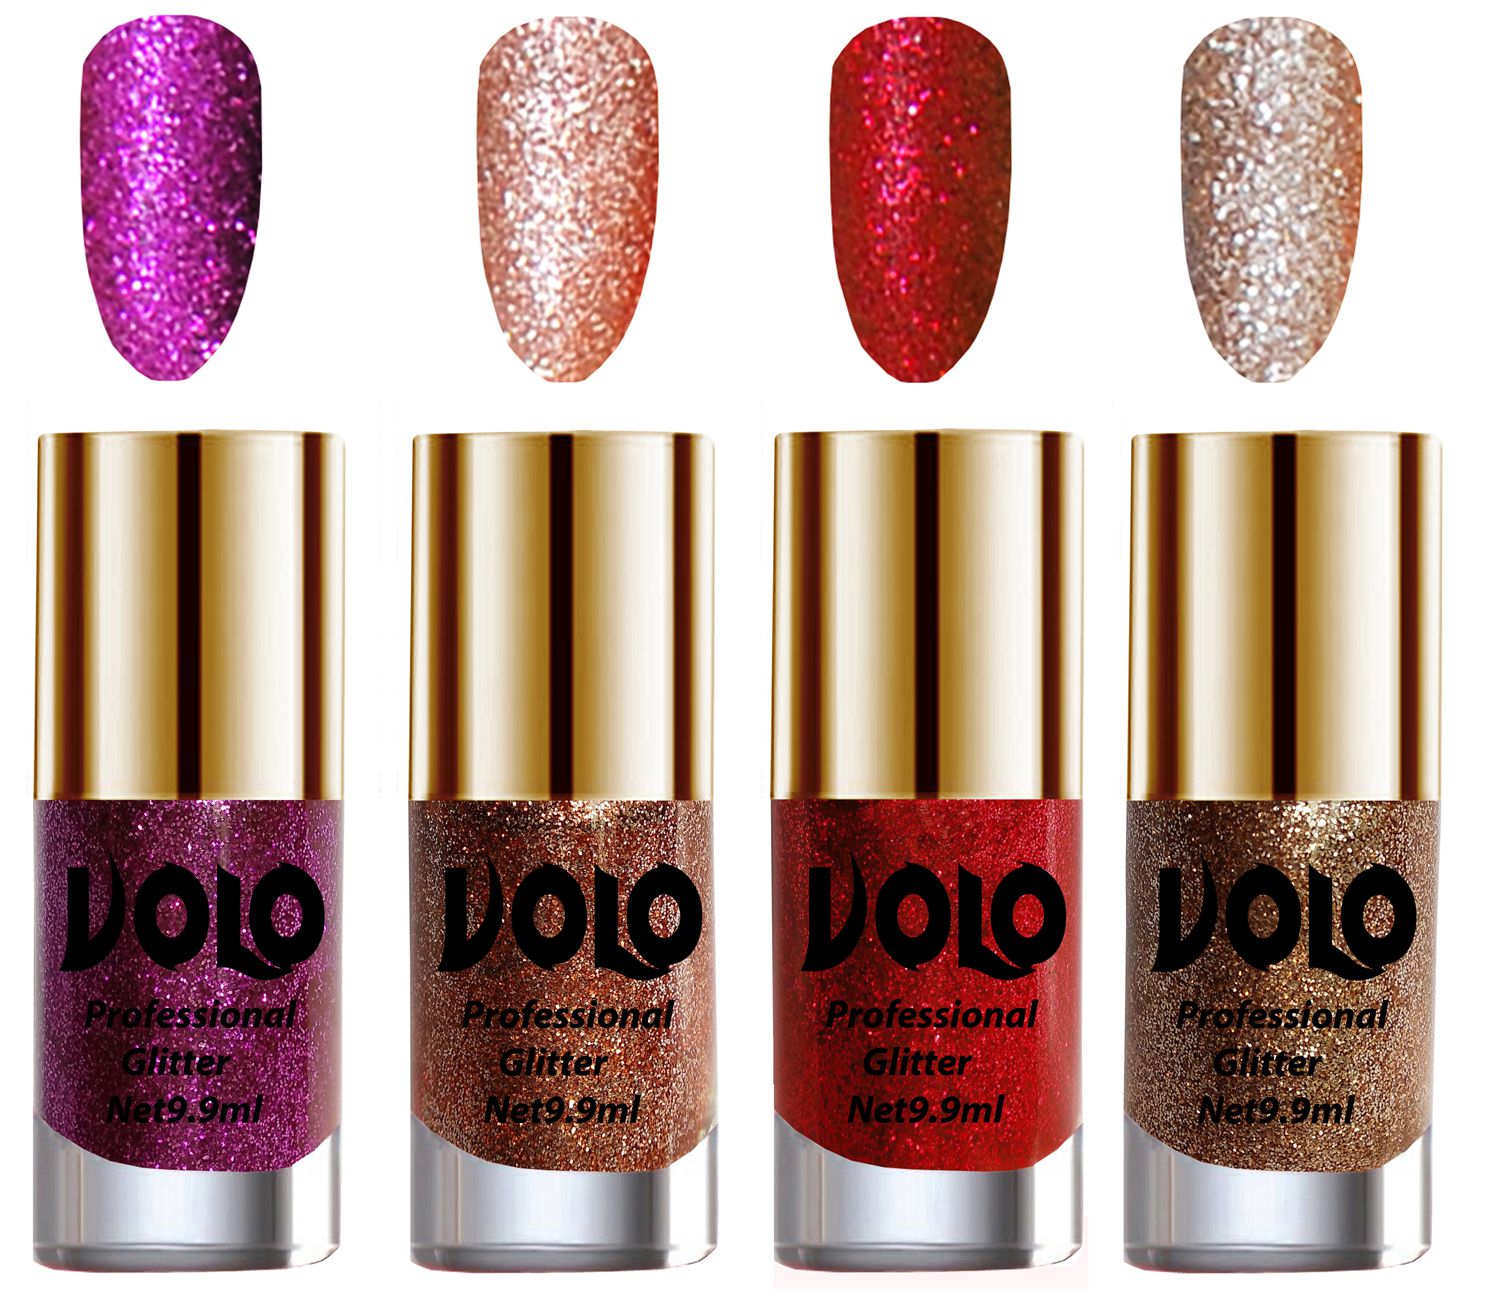     			VOLO Professionally Used Glitter Shine Nail Polish Purple,Peach,Red Gold Pack of 4 39 mL